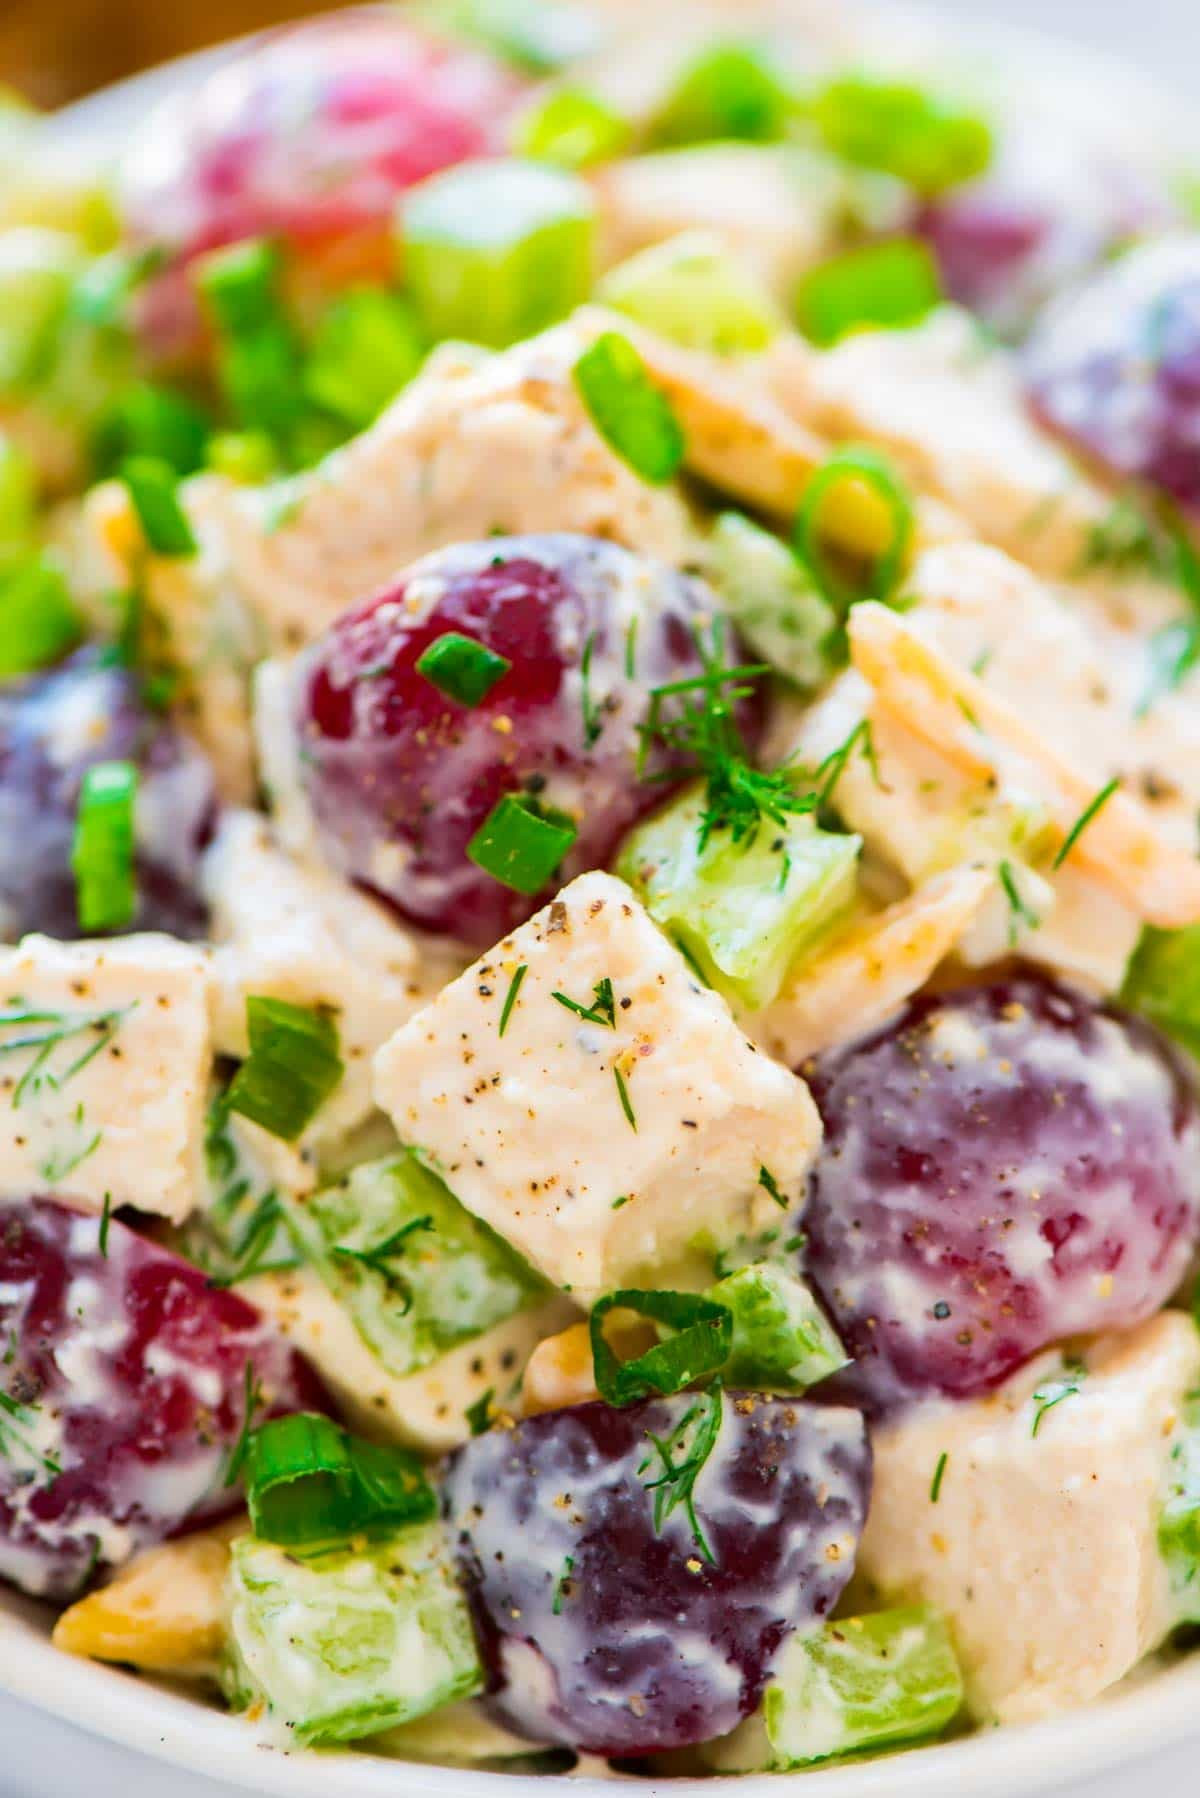 Easy Chicken Salad Recipe With Grapes
 Greek Yogurt Chicken Salad with Dill